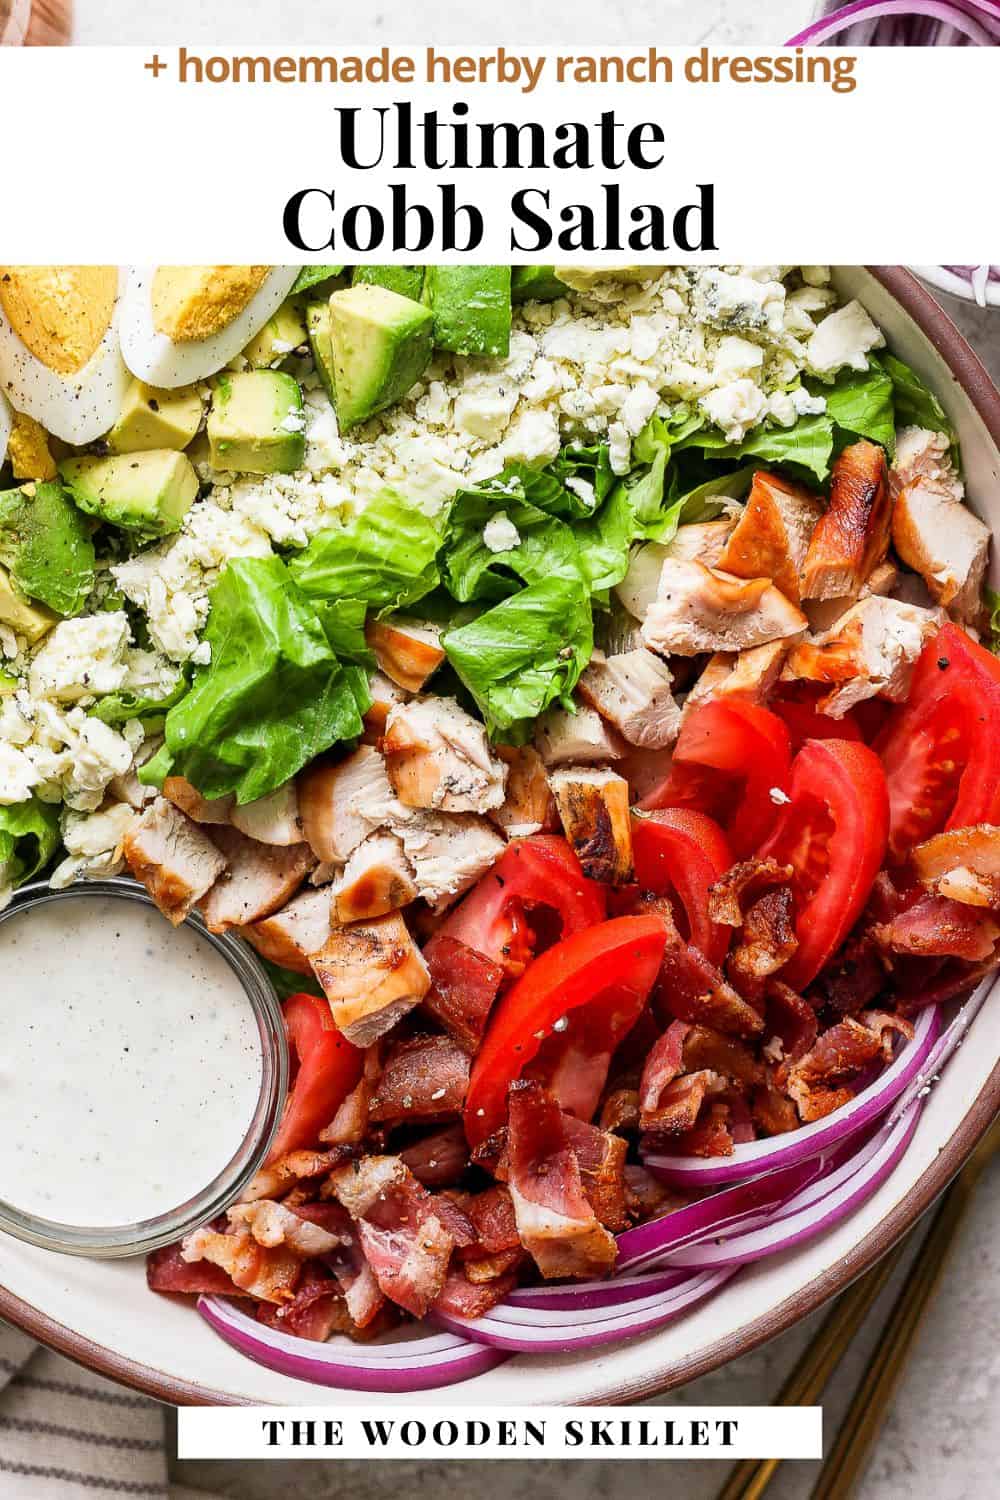 Pinterest image showing a bowl of cobb salad with the title Ultimate Cobb Salad + homemade herby ranch dressing.